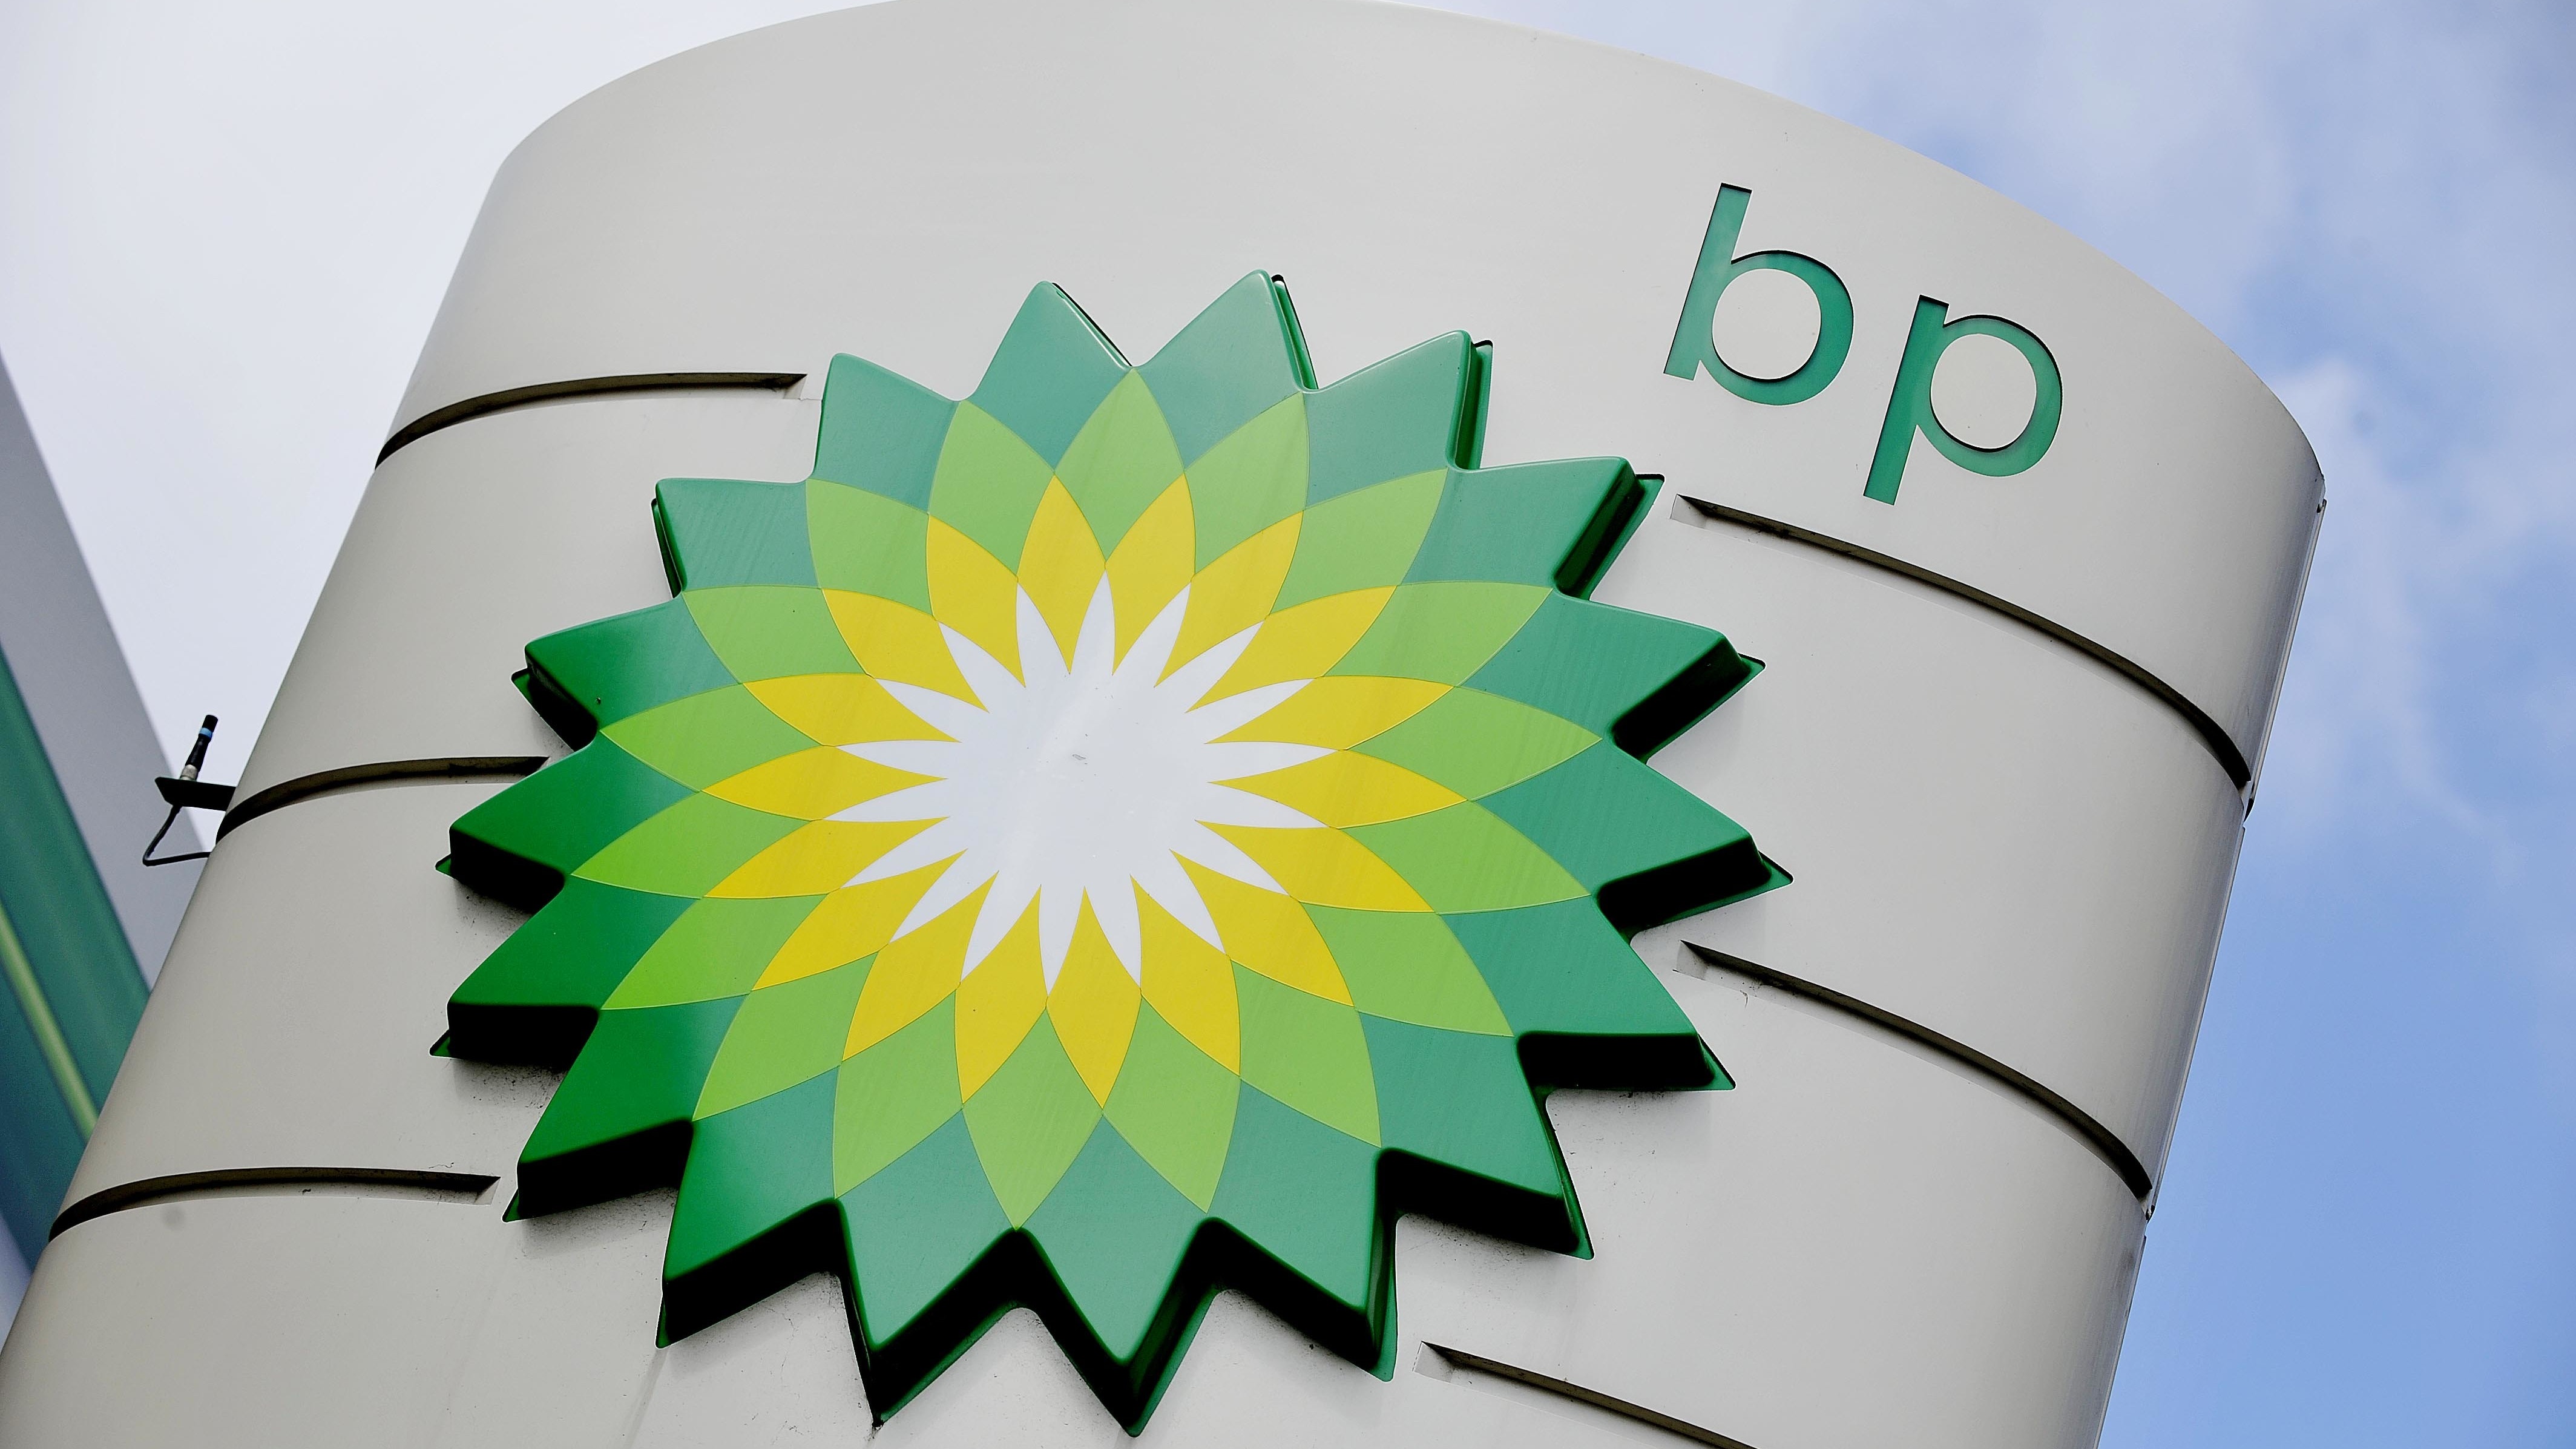 BP chief says Covid has deepened commitment to net-zero 